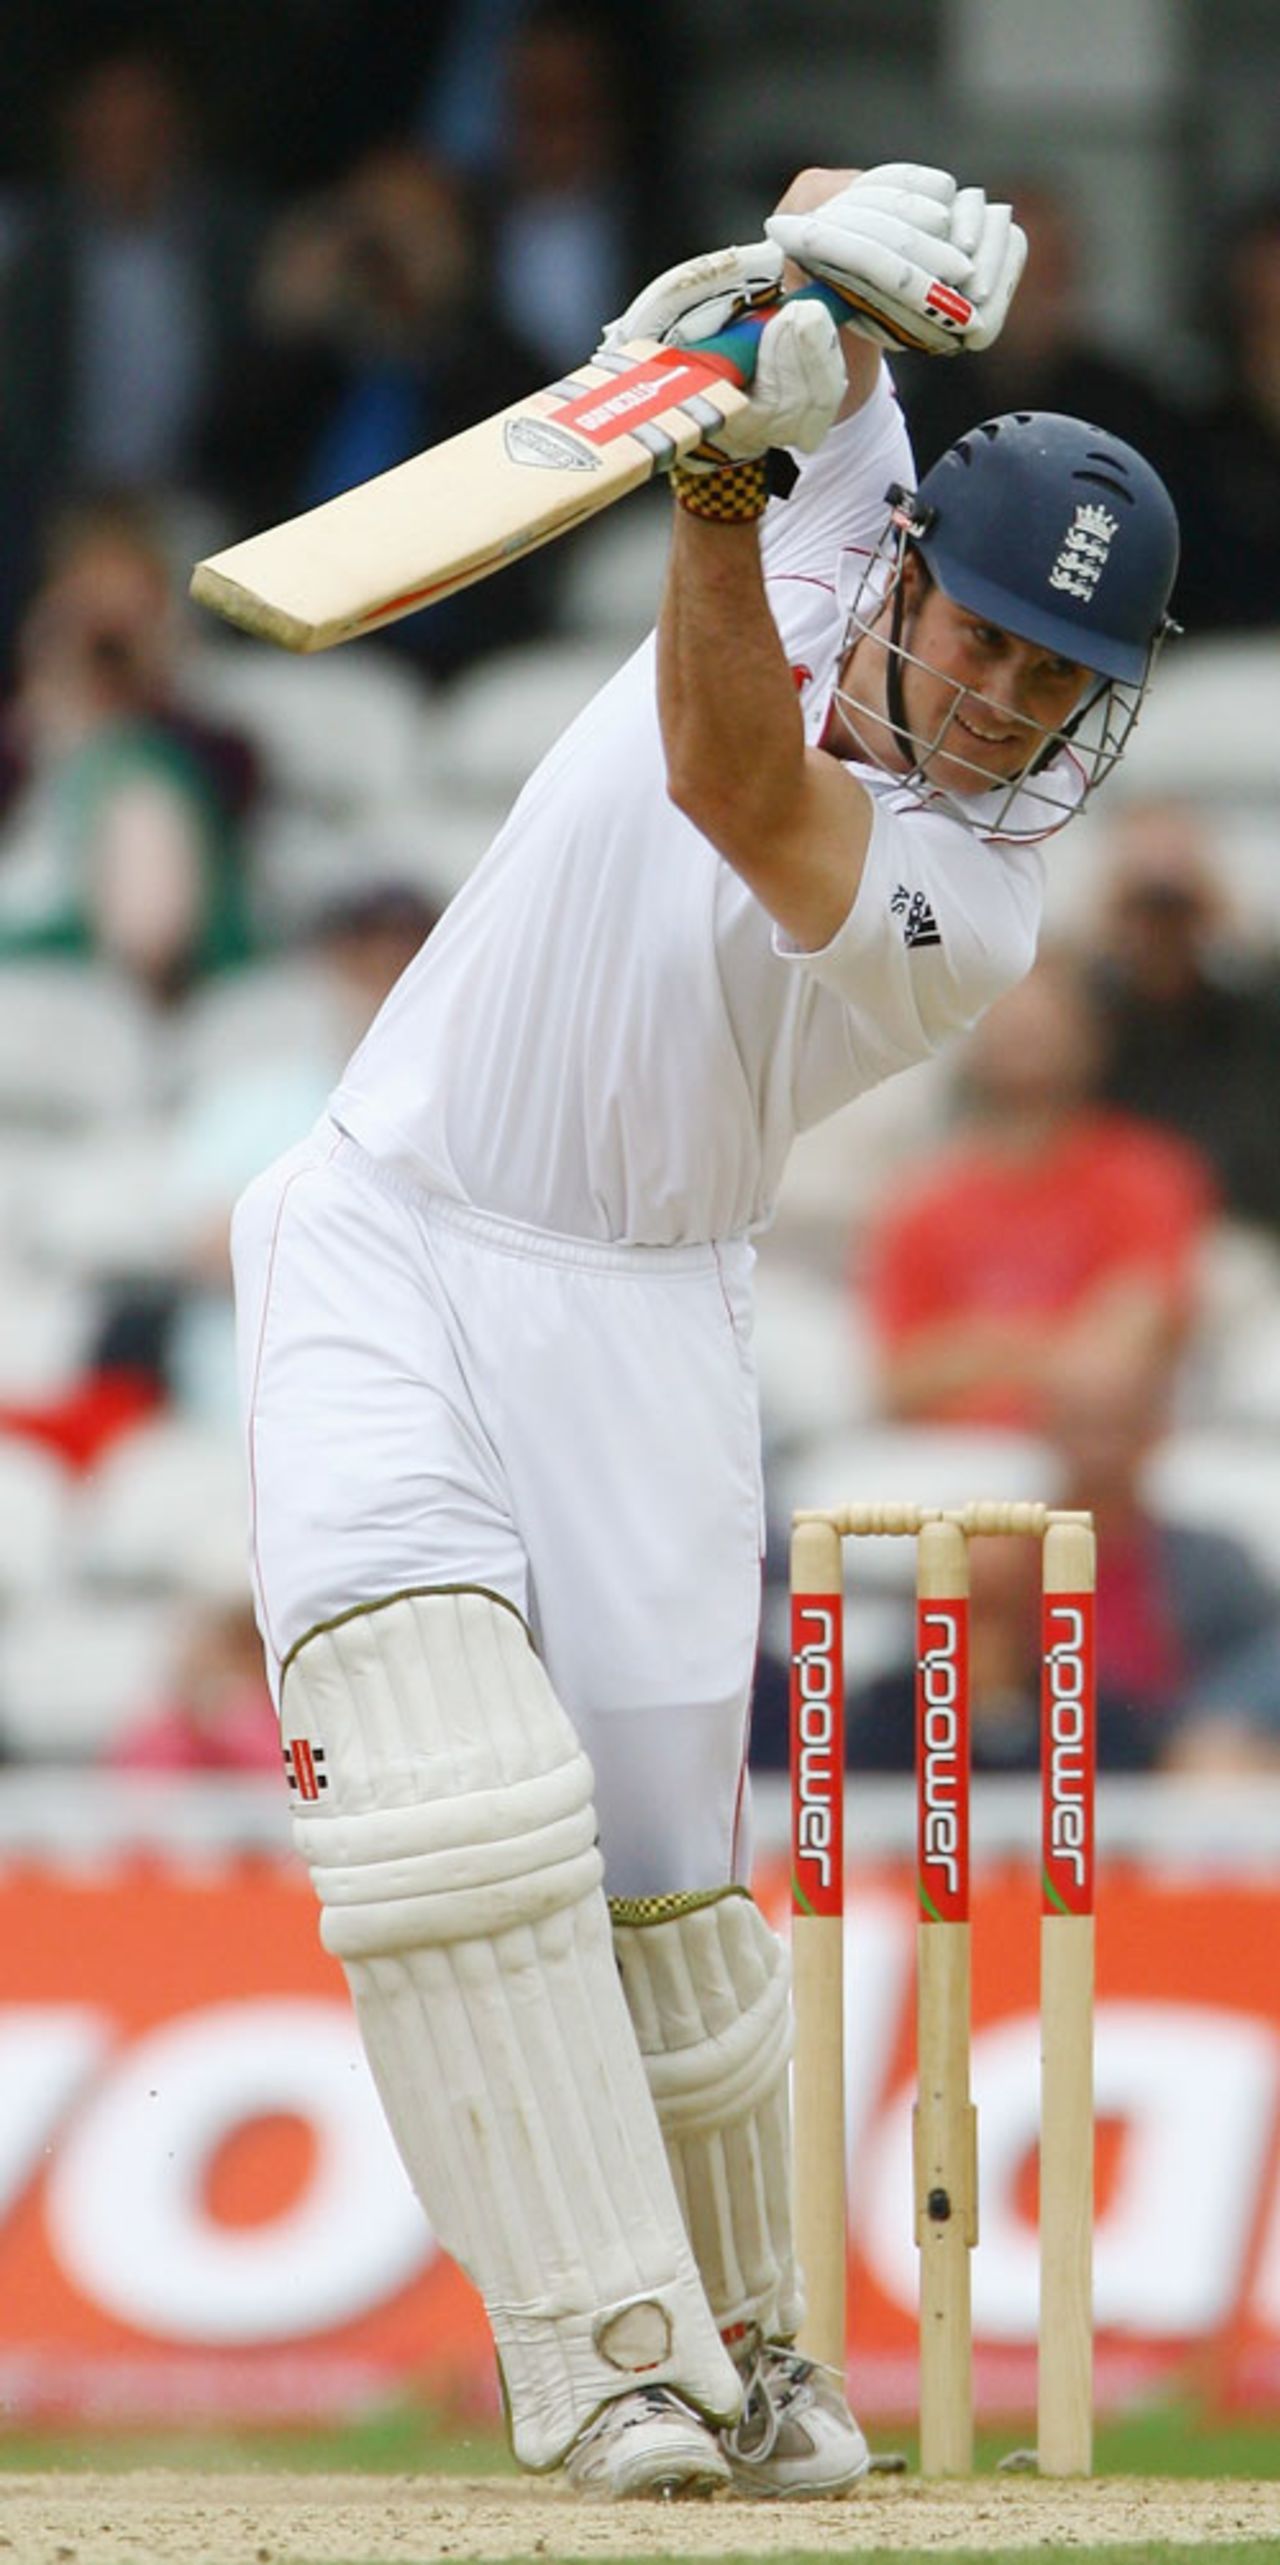 Andrew Strauss drives during his century partnership with Alastair Cook, England v South Africa, 4th Test, The Oval, August 11, 2008